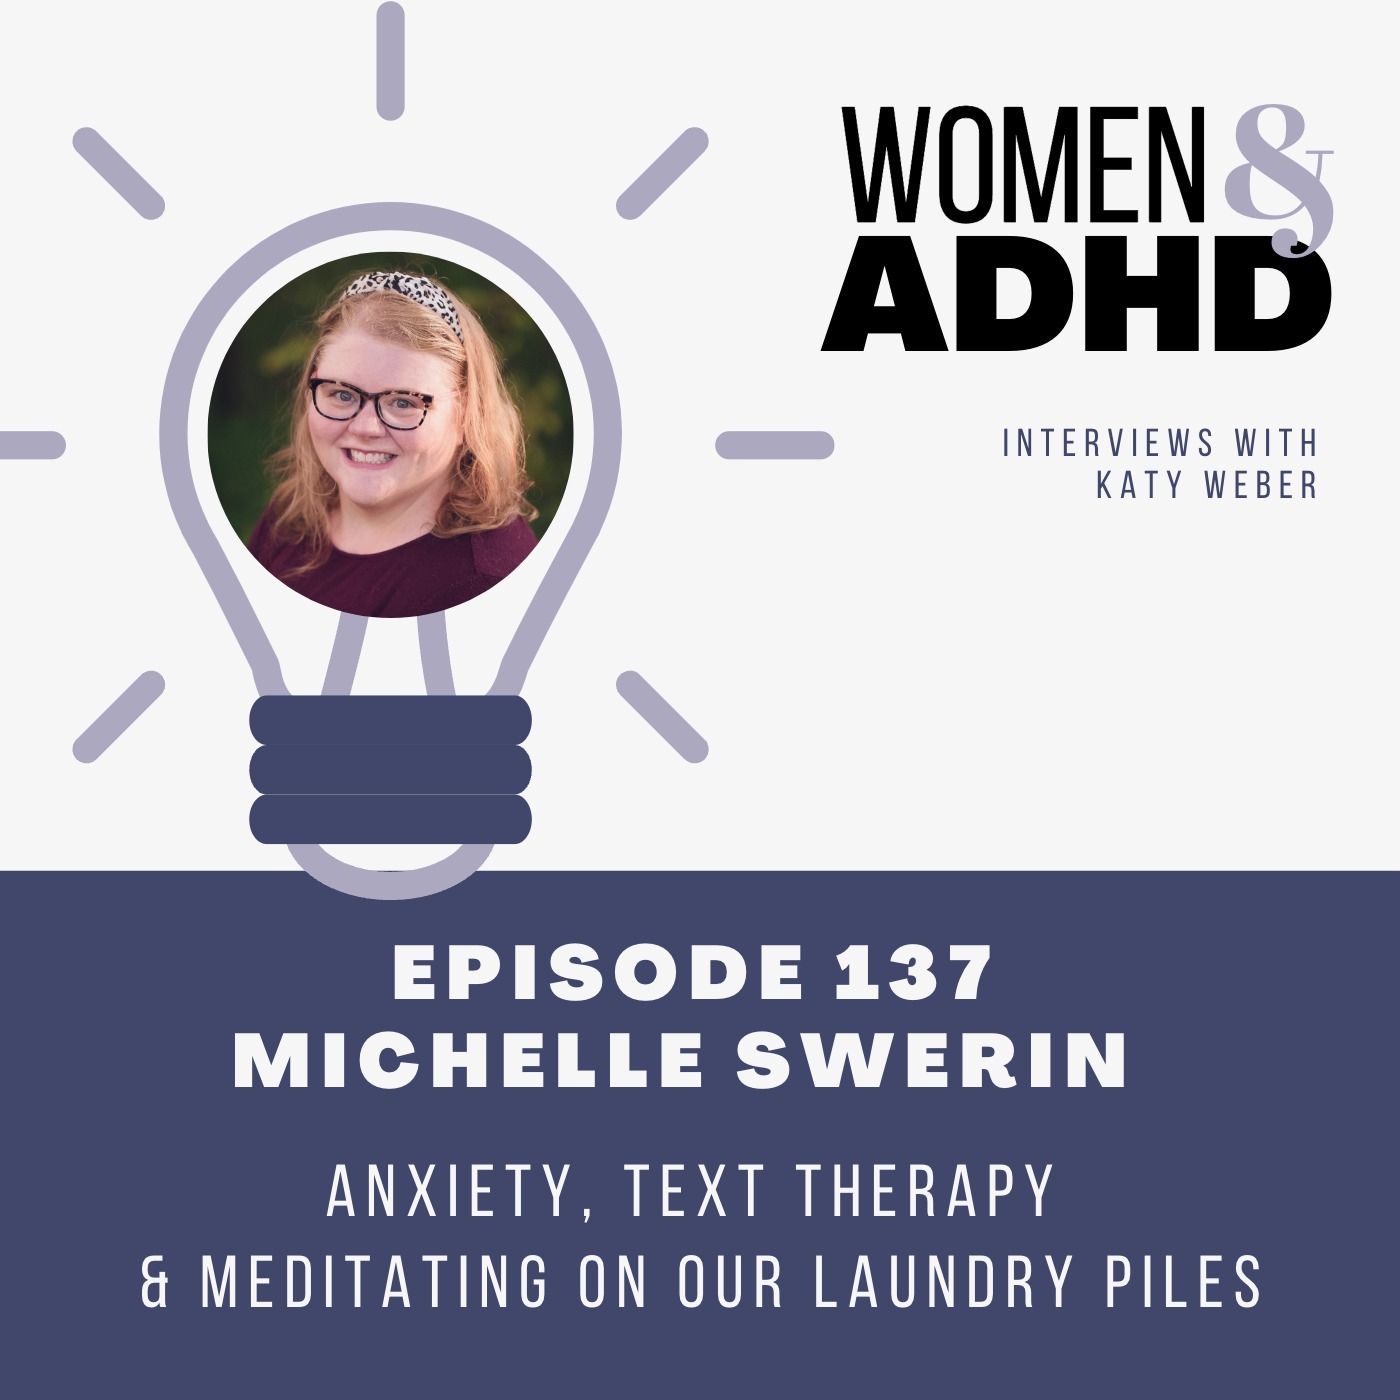 Michelle Swerin: Anxiety, text therapy & meditating on our laundry piles